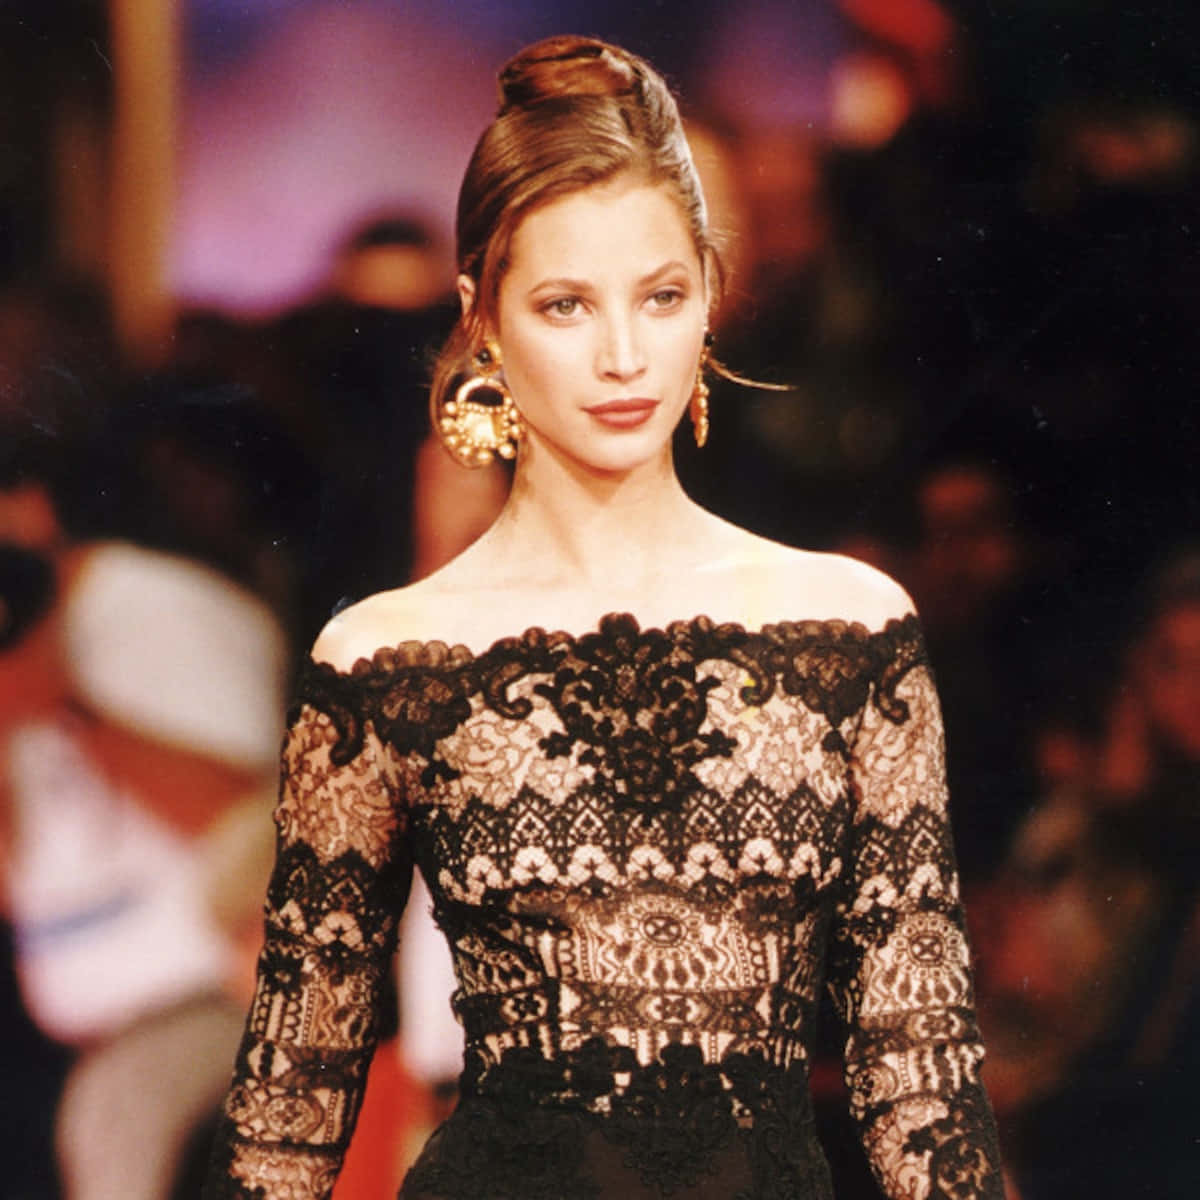 Christy Turlington In A Black Outfit At A Fashion Event Wallpaper